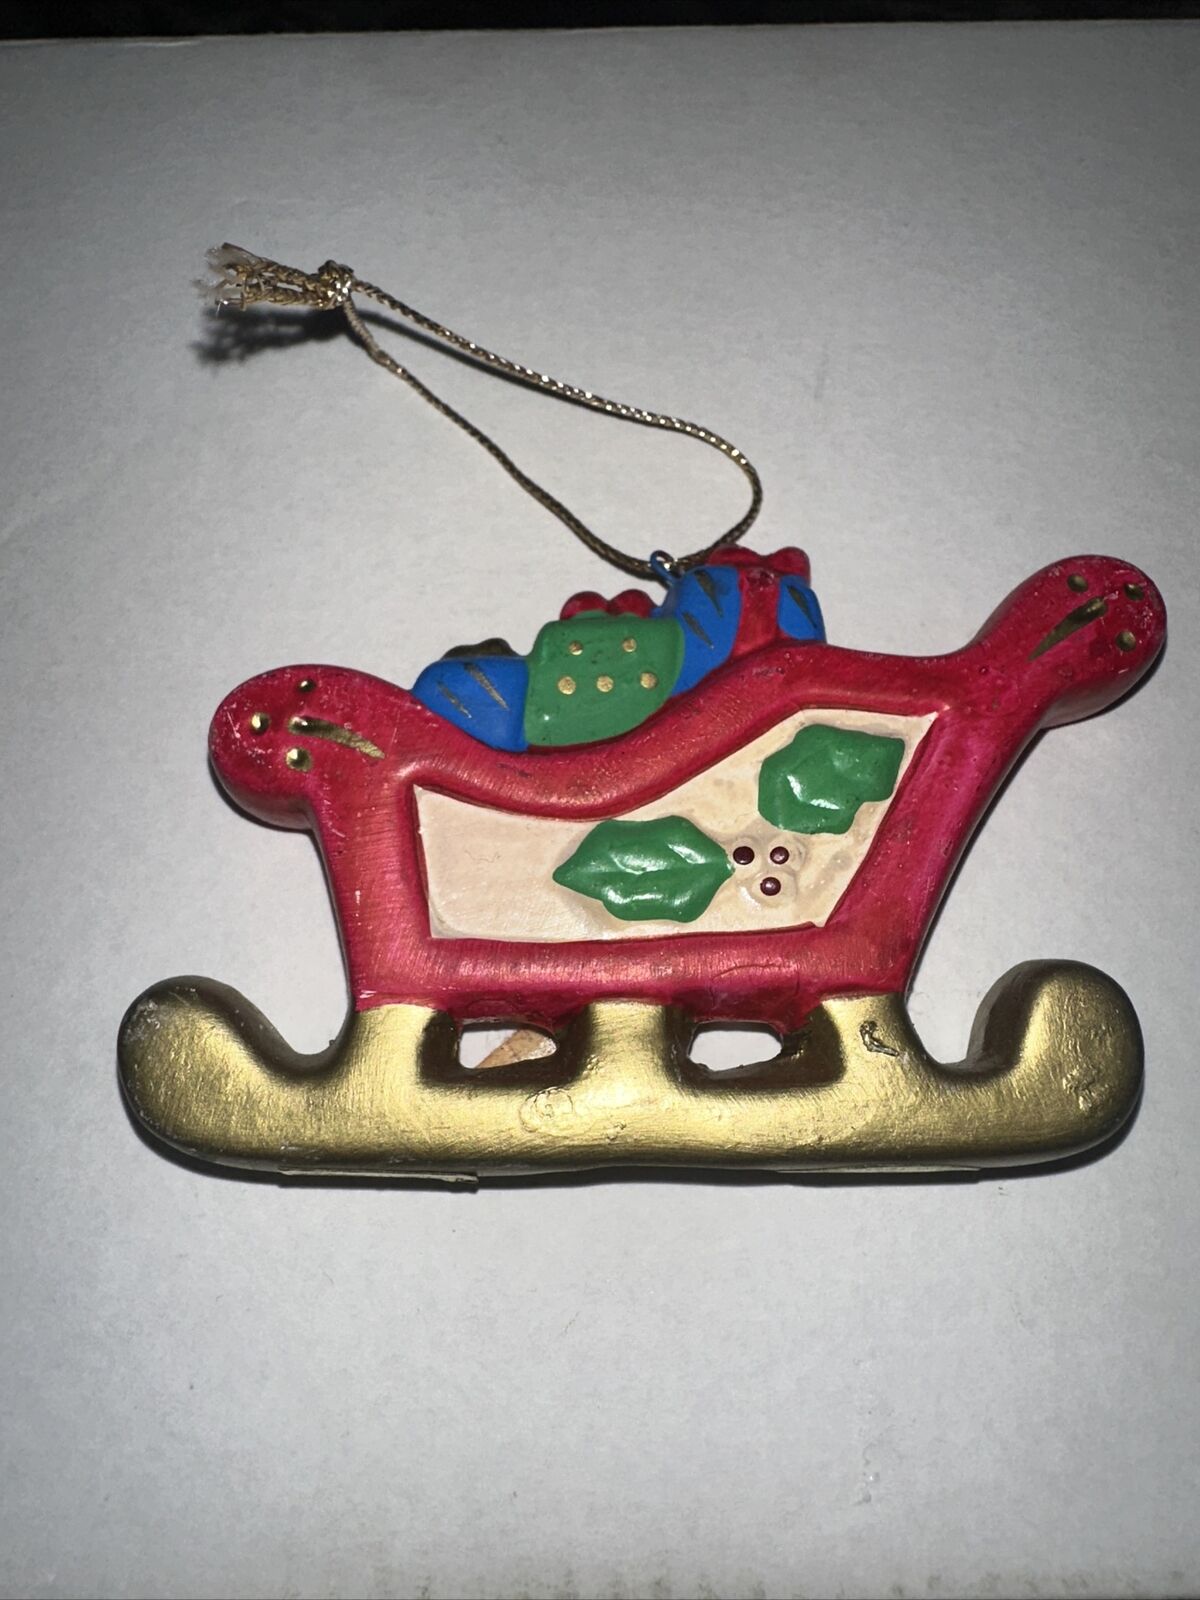 Russ Berrie Sleigh with Presents Porcelain Christmas Ornament Vintage 1970s 1060